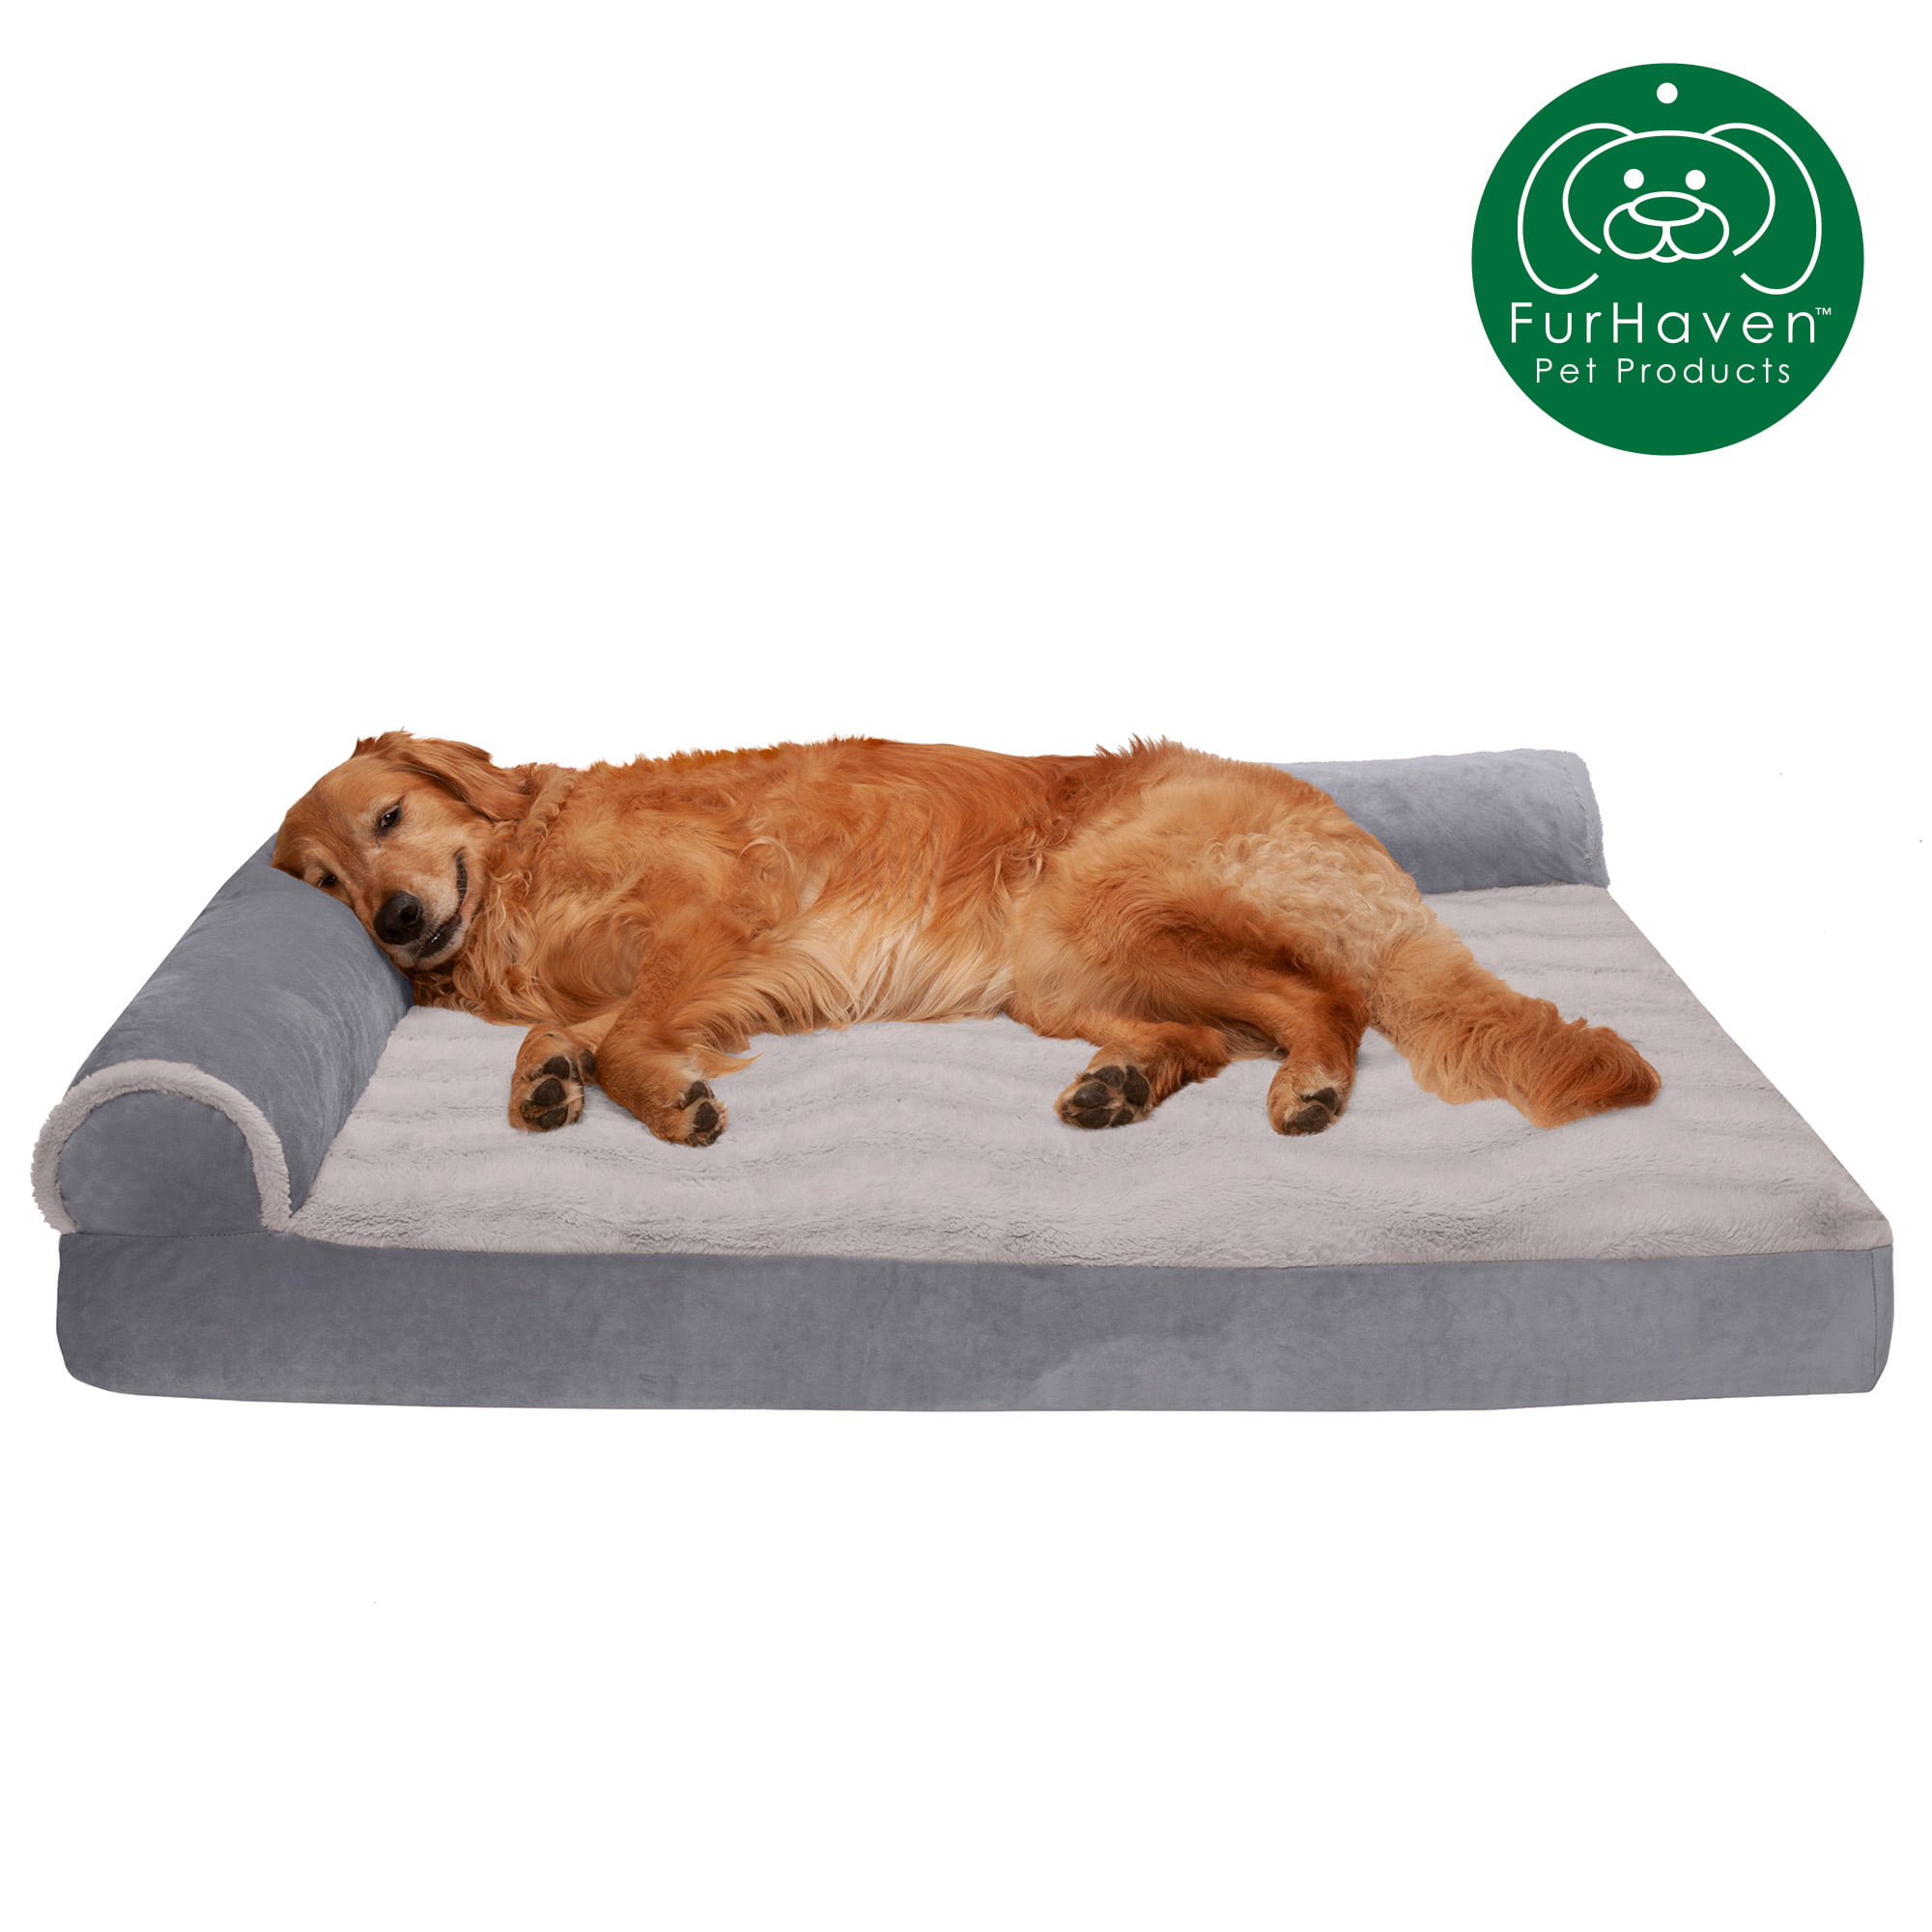 Furhaven Pet Dog Bed Available in Multiple Colors & Styles Orthopedic Ergonomic Luxe Lounger Cradle Mattress Pet Bed w/ Removable Cover for Dogs & Cats